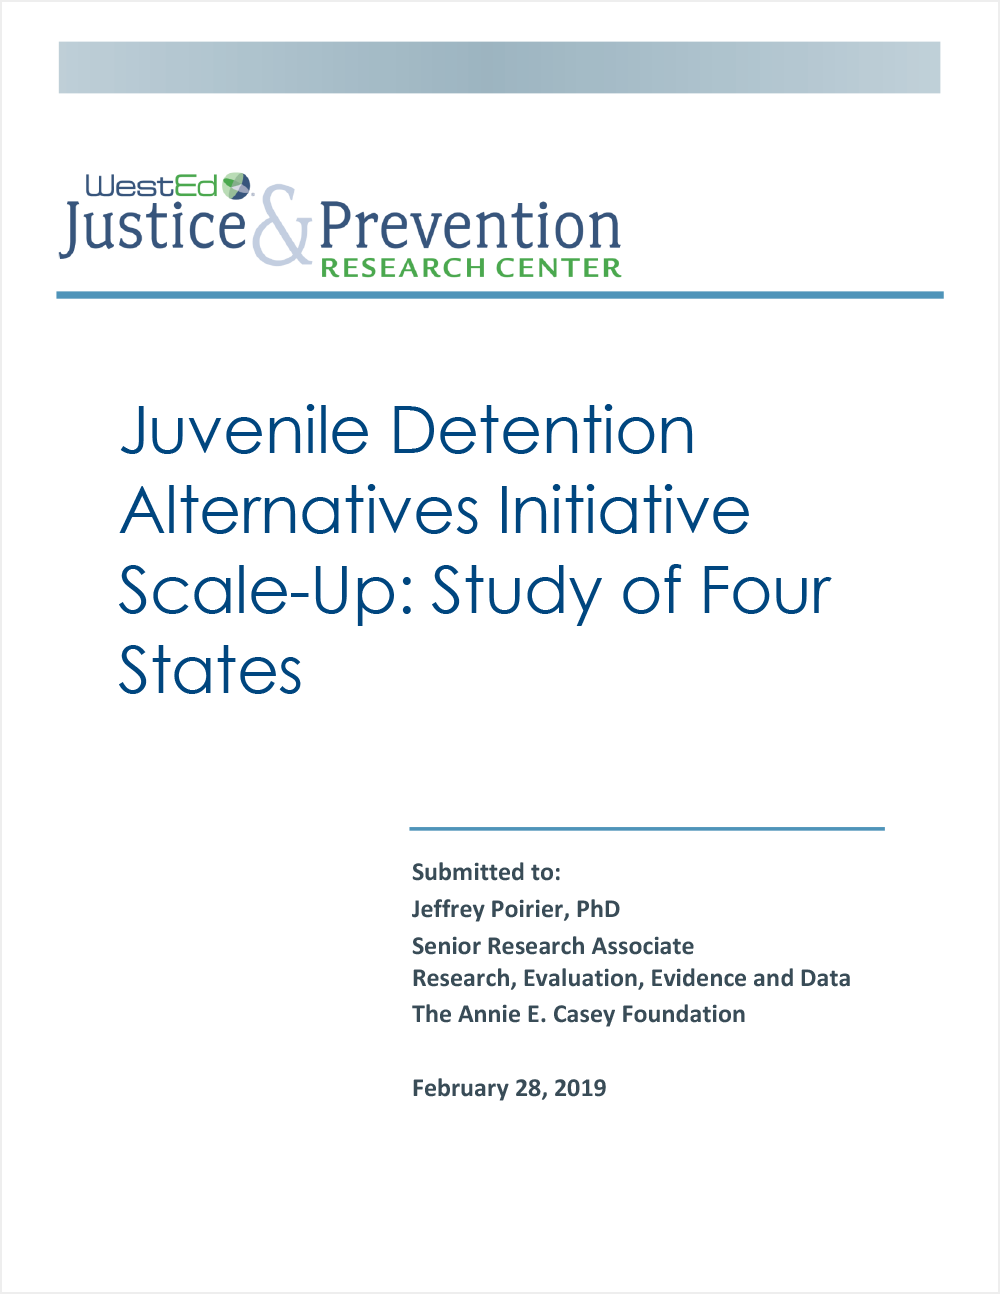 Juvenile Detention Alternatives Initiative Scale-Up: Study of Four States